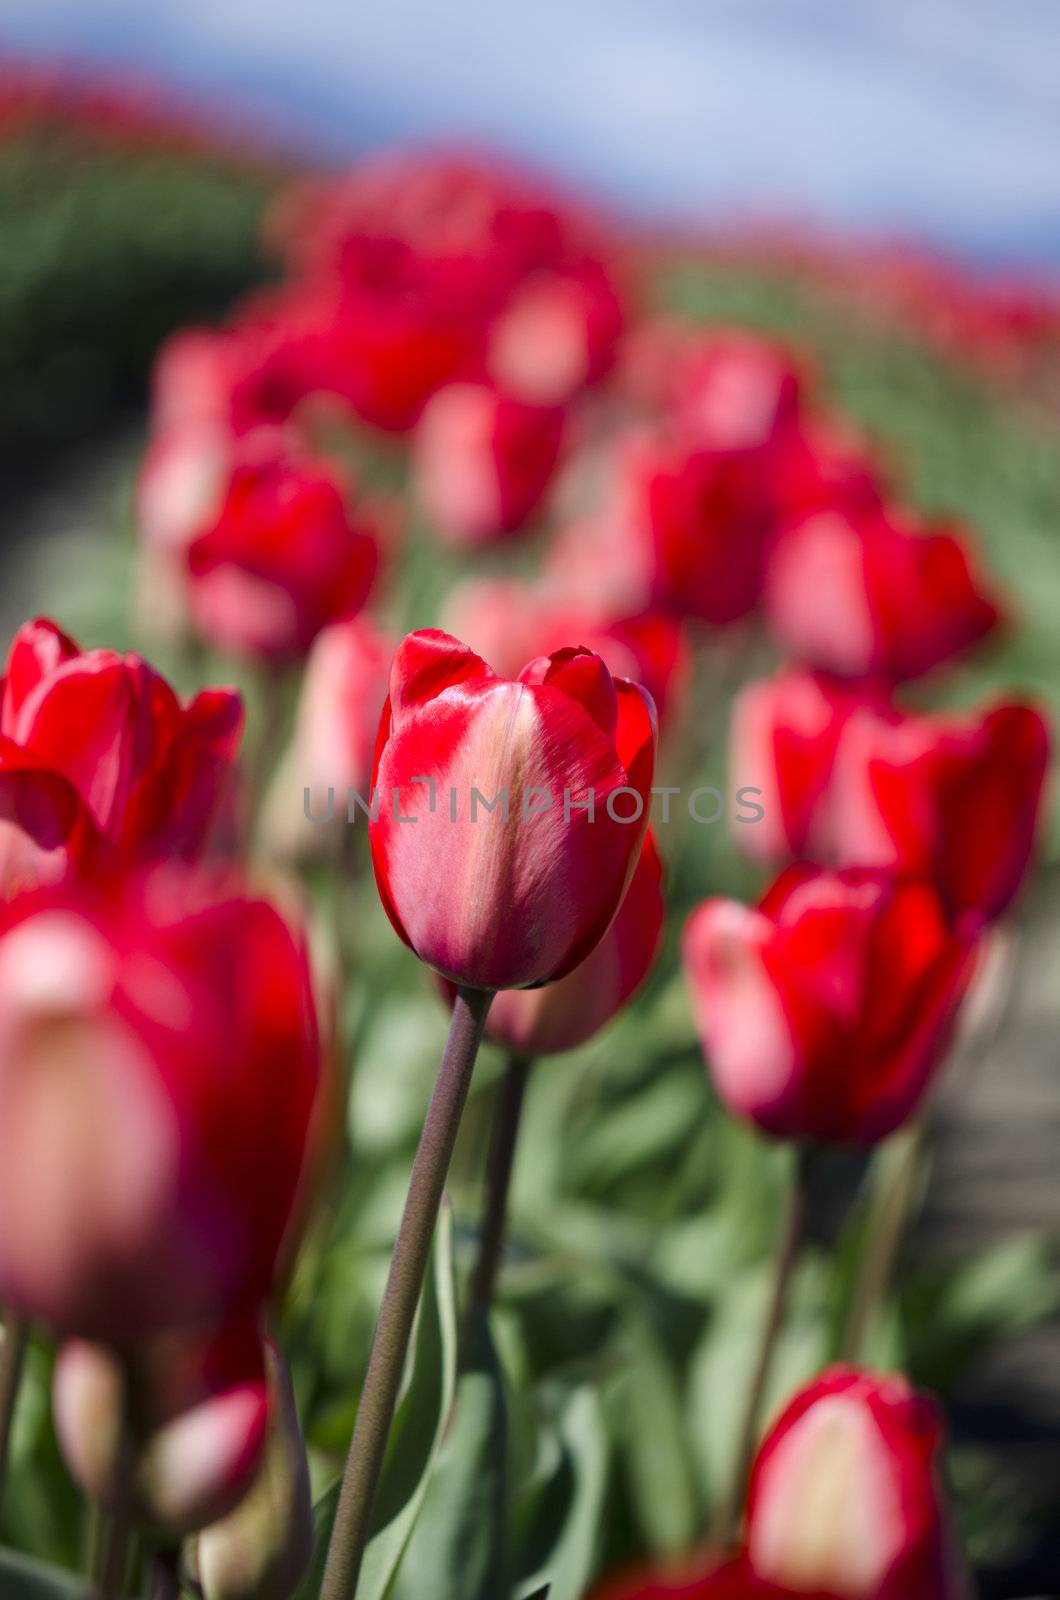 red tulips by seattlephoto